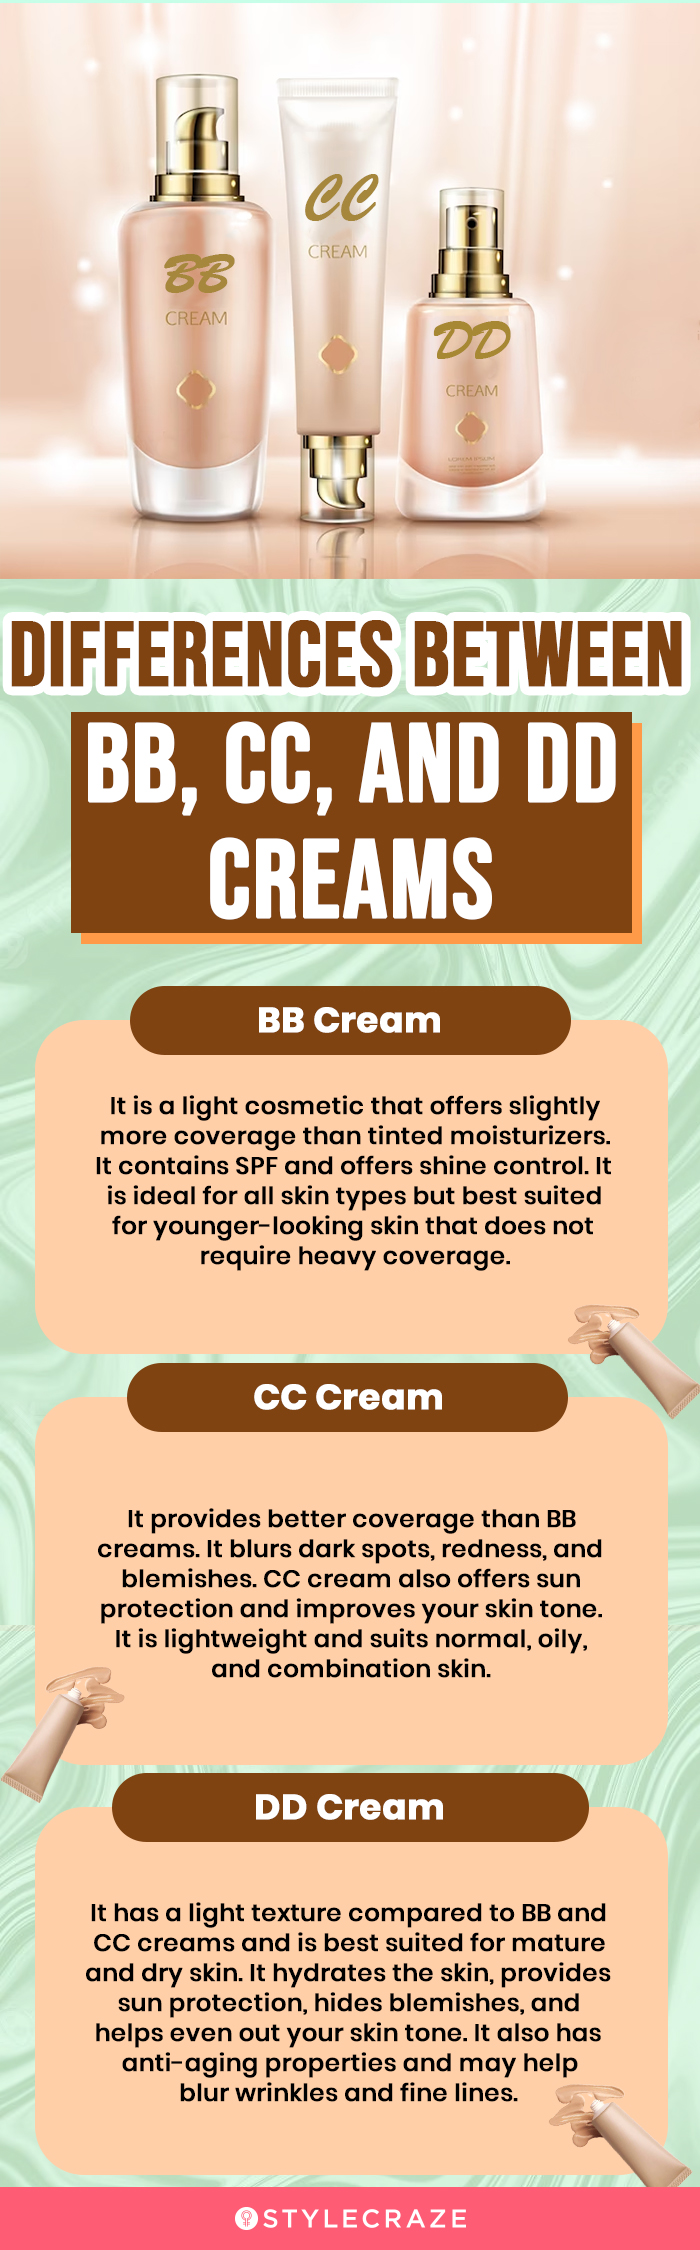 differences between bb, cc, and dd creams (infographic)